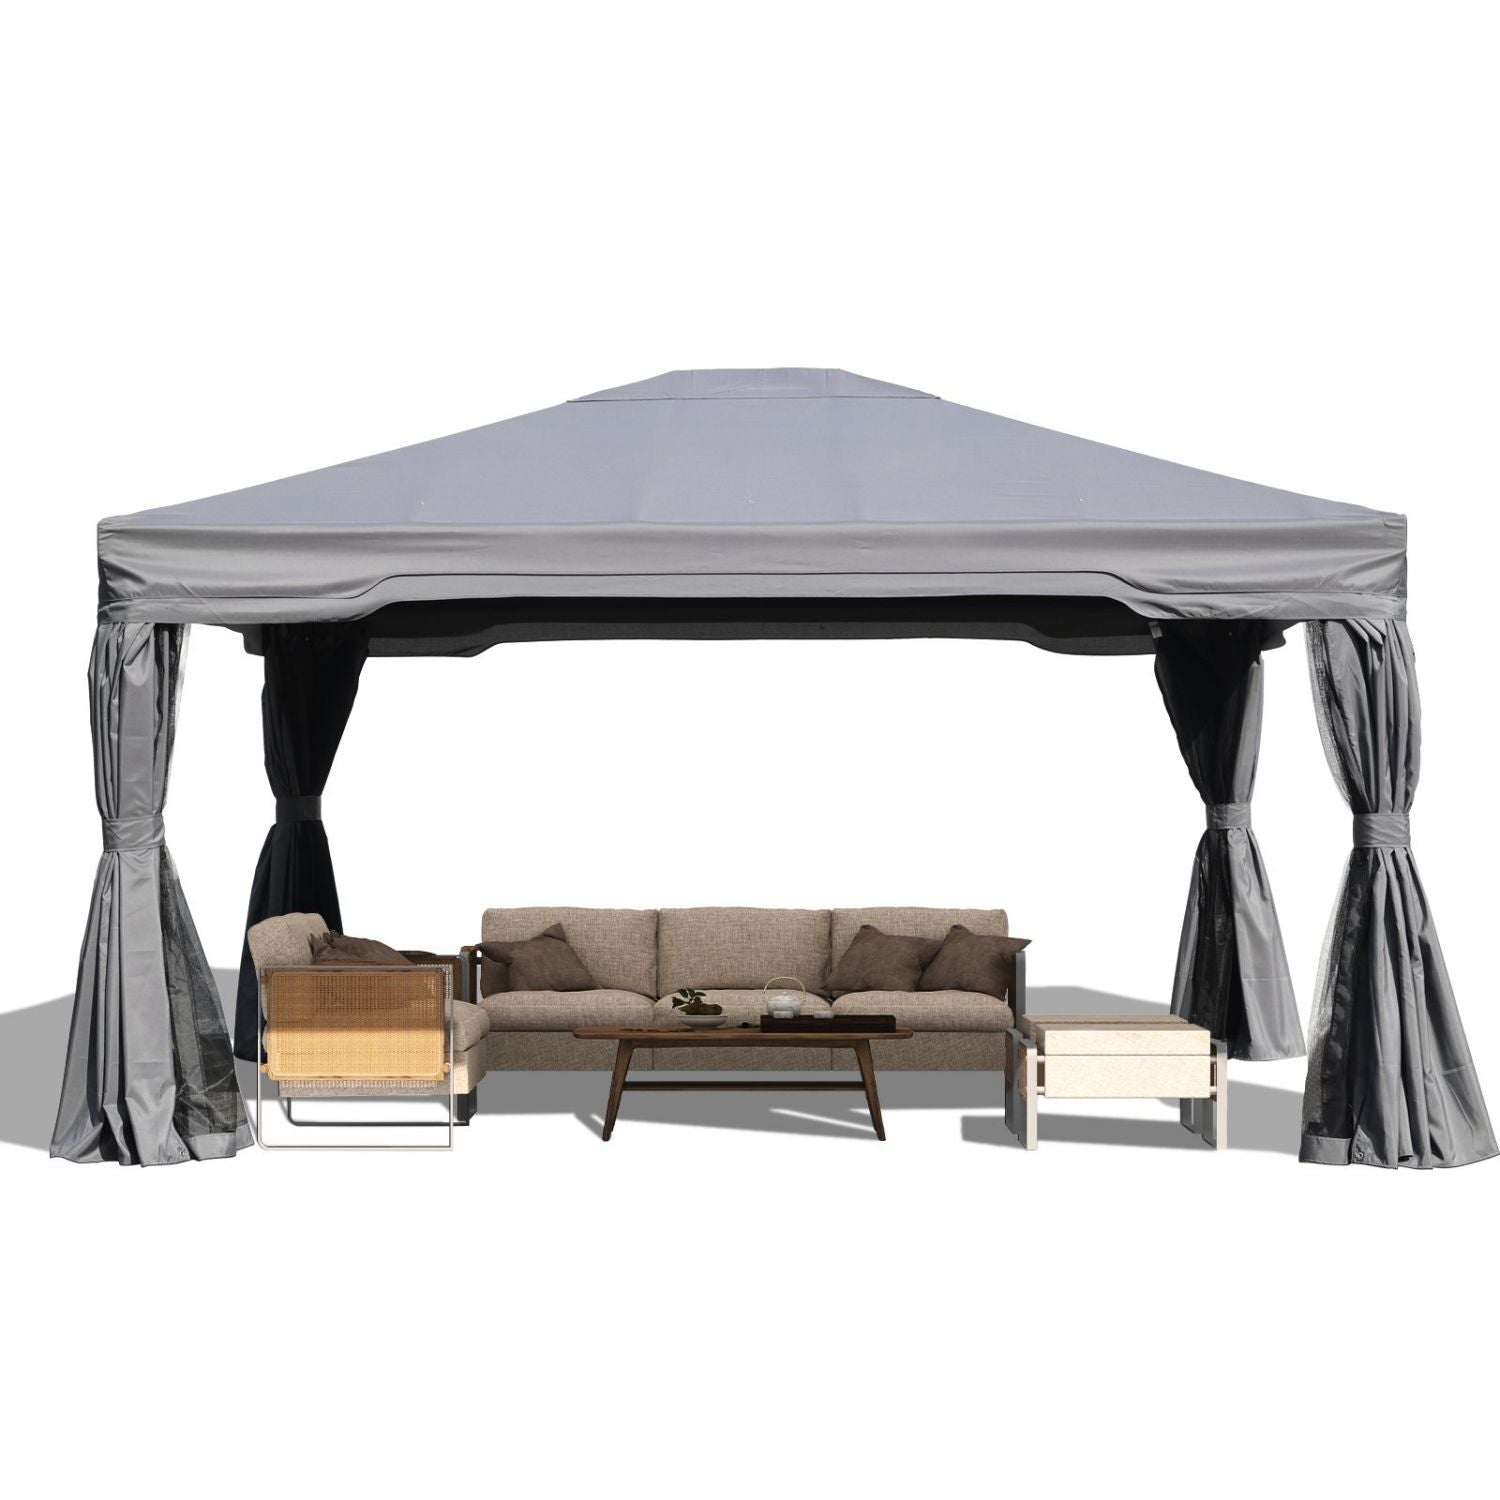 12 x 12 ft. Outdoor Gazebo Tent Canopy Shelter, Aluminum Frame with Privacy Curtain and Netting Gazebo Aoodor LLC 12' x 14' x 9' Gray 